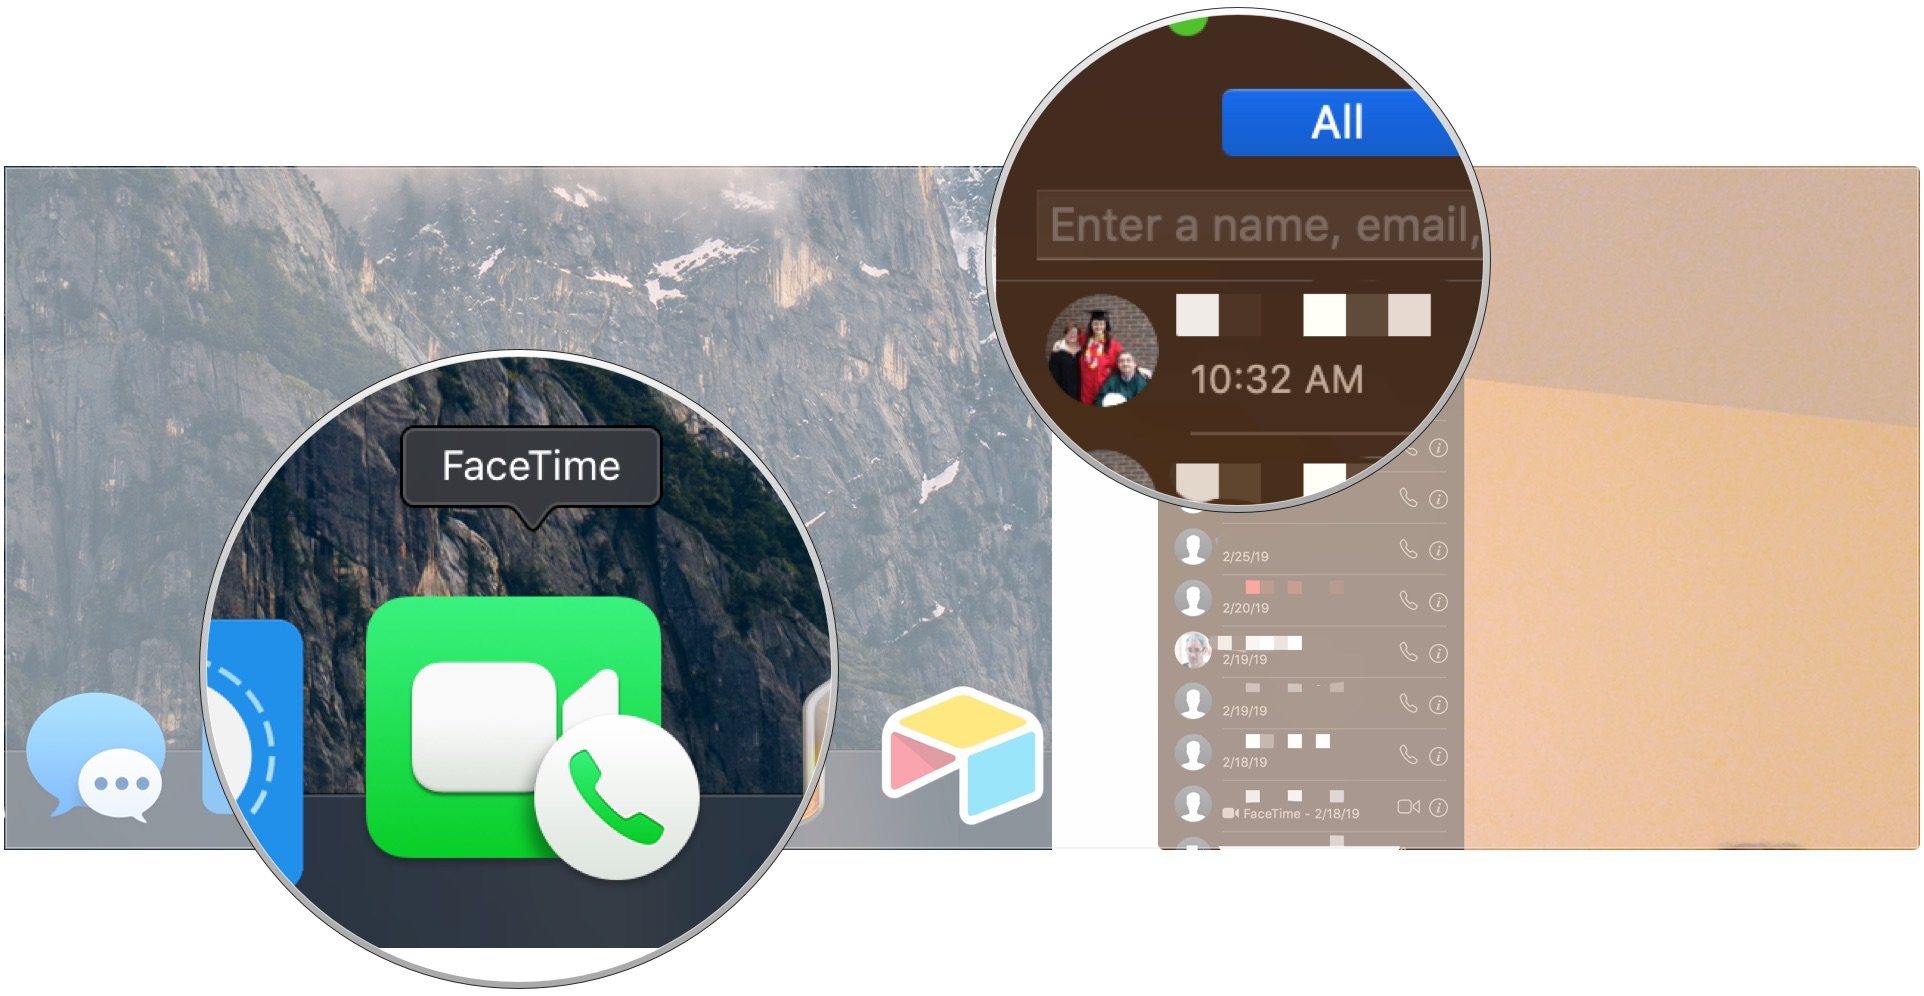 Make FaceTime calls from your Mac, showing how to open FaceTime from your Dock, then enter a name, address, or phone number